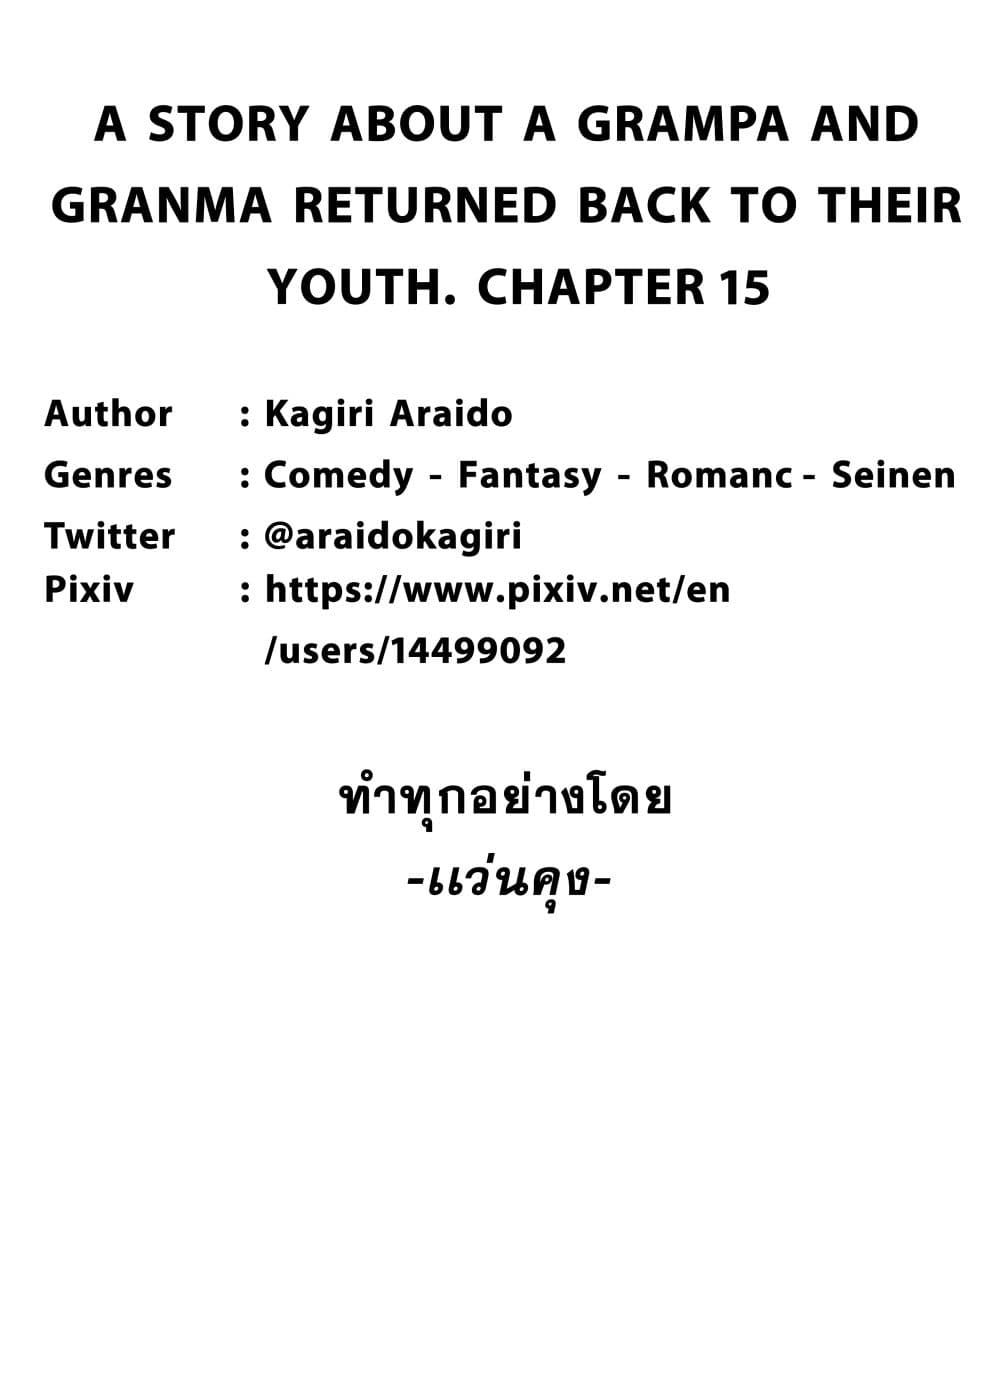 A Story About A Grampa and Granma Returned Back to their Youth คู่รักวัยดึกหวนคืนวัยหวาน 15-15